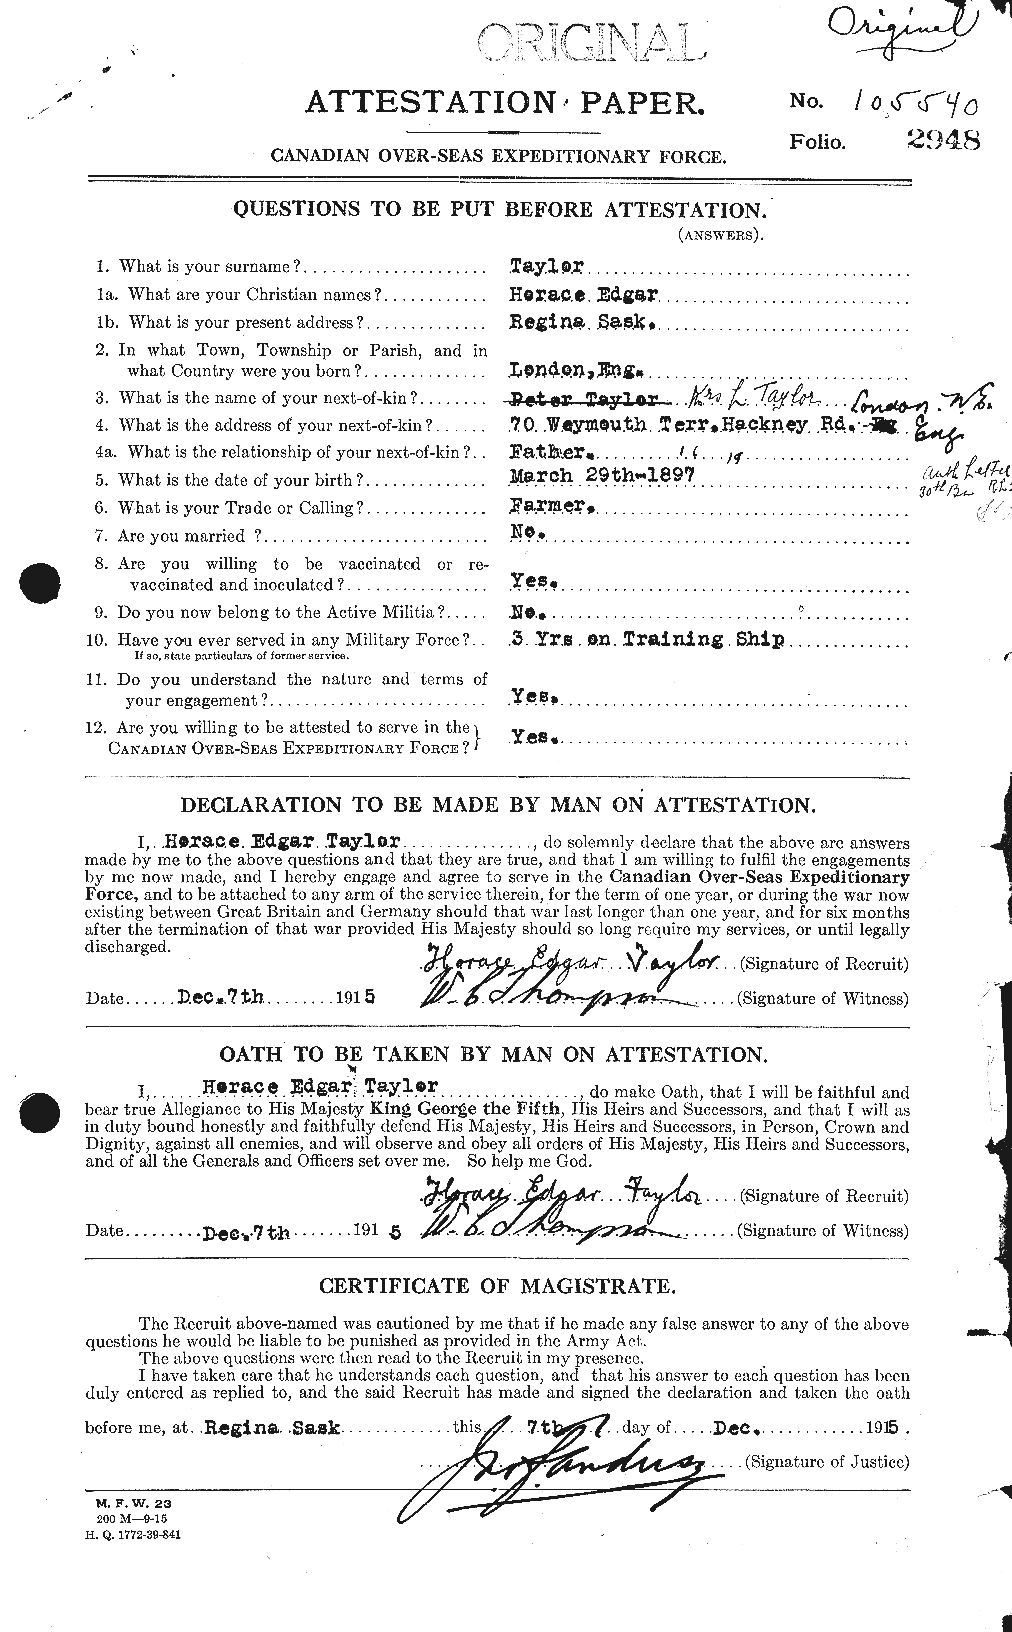 Personnel Records of the First World War - CEF 626593a